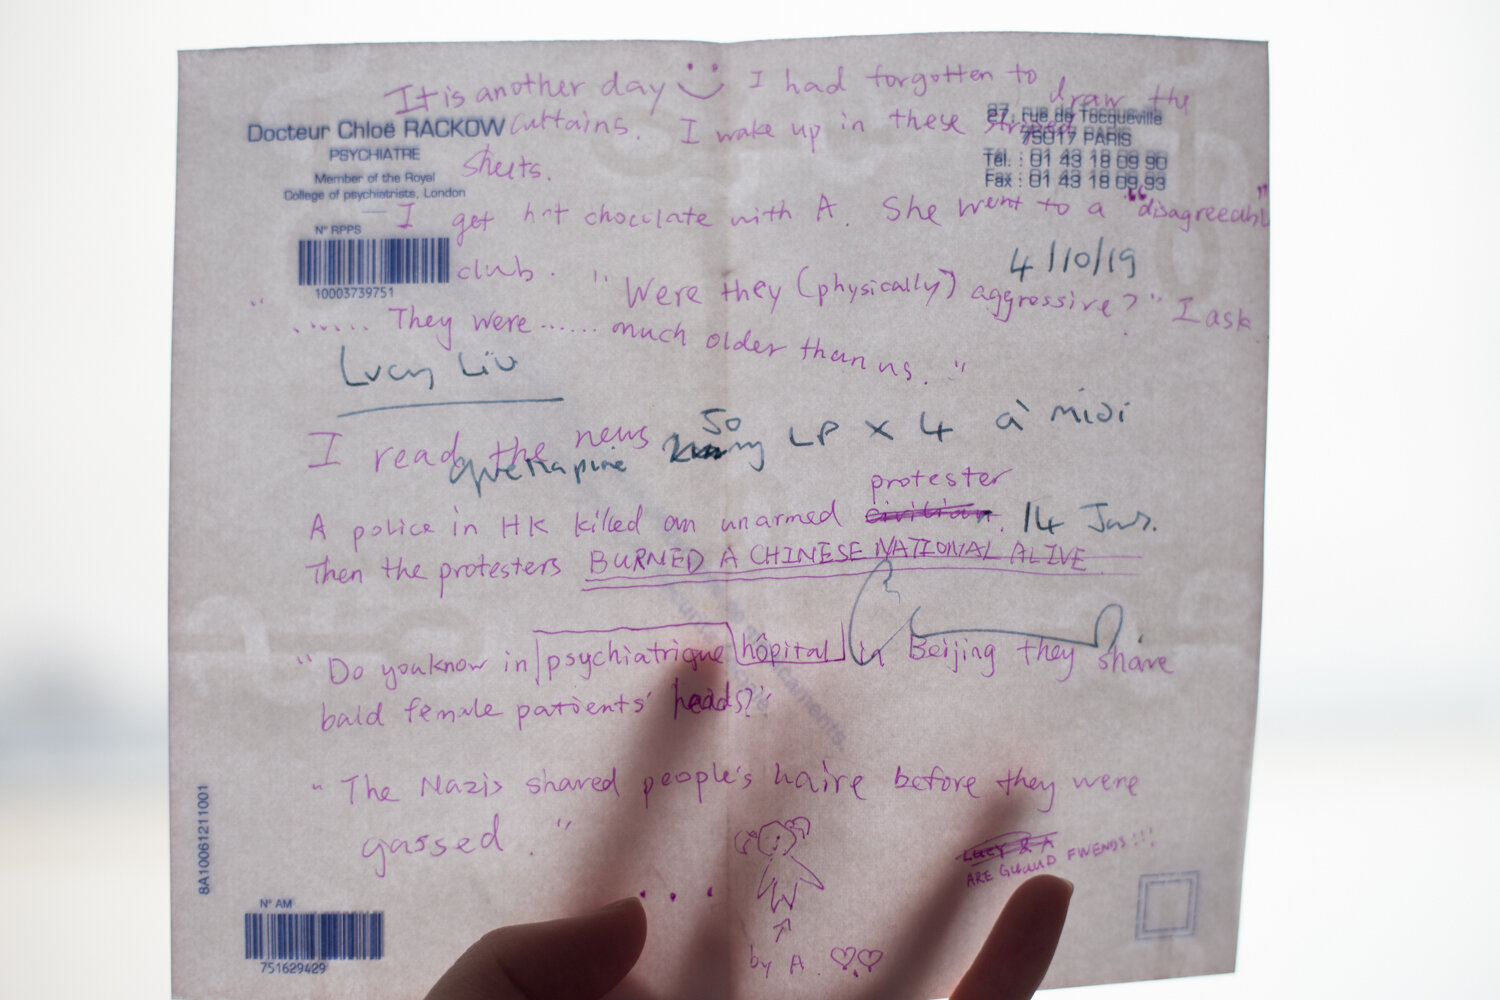 Photograph of a translucent piece of paper held up to the camera covered in notes in pink and black pen in English and French, including the artist’s name. Two barcodes and the name, address, phone, and fax numbers are printed in top left and right corners.